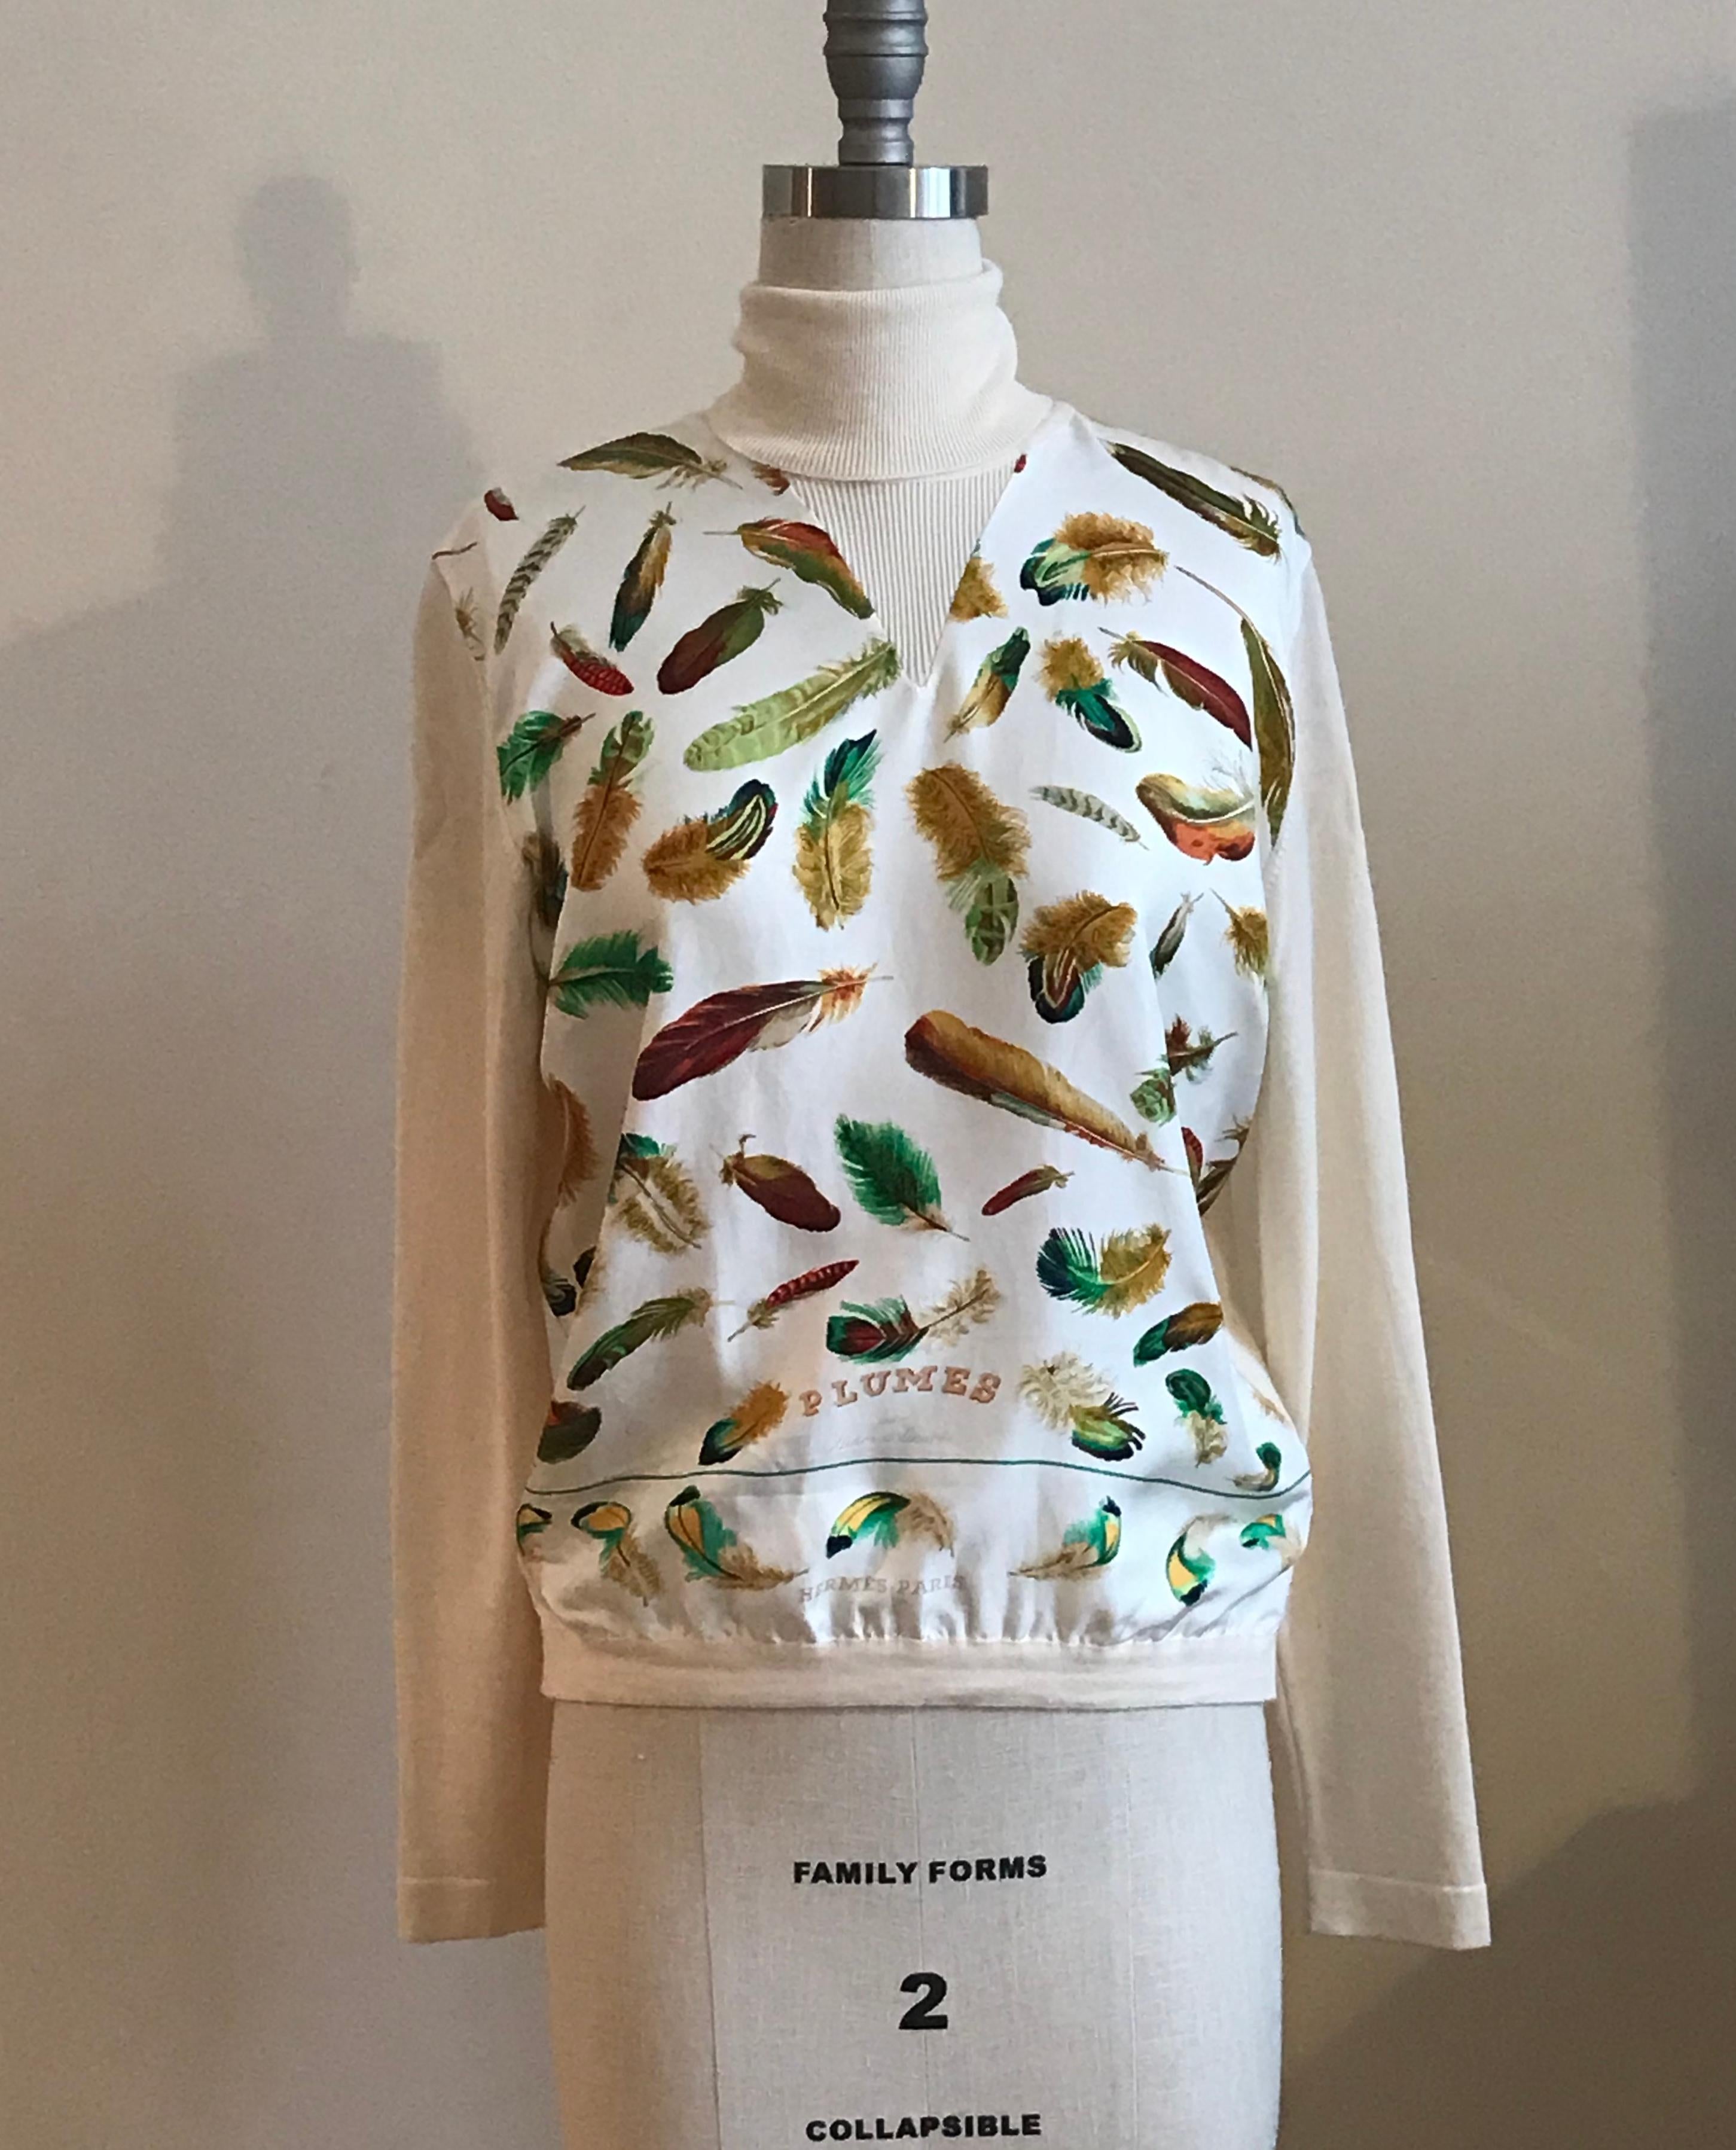 Very rare vintage Hermes Paris Cream knit long sleeve turtleneck sweater with ivory silk scarf print front featuring green, gold, and brown feathers. Front bottom reads PLUMES, par Henri de Linares, HERMES-PARIS.

100% silk front with 100% wool fine